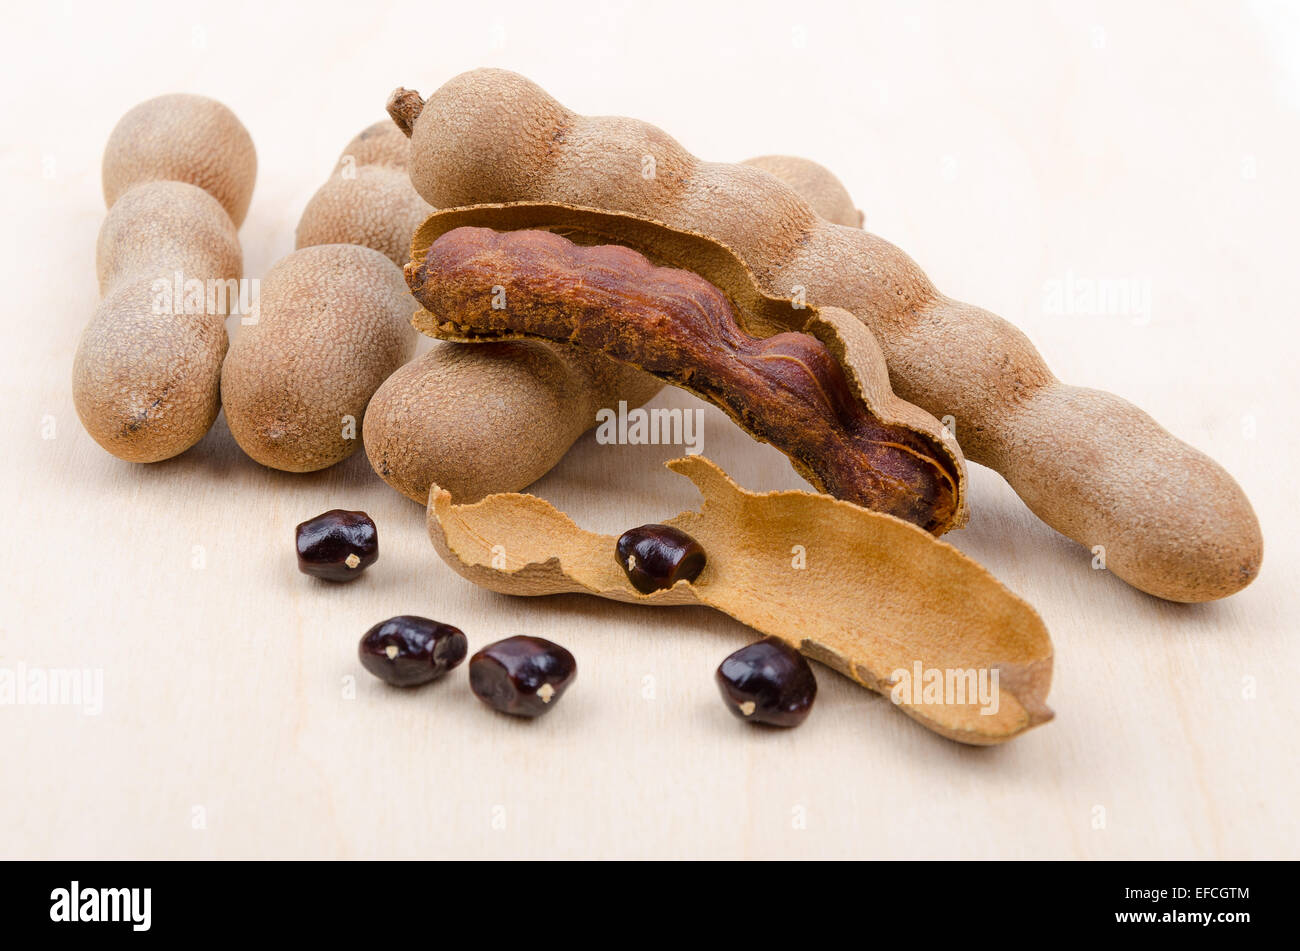 Dried tamarind fruits with seeds on wood. One open pod with pulp inside its shell. Tamarindus indica. Stock Photo